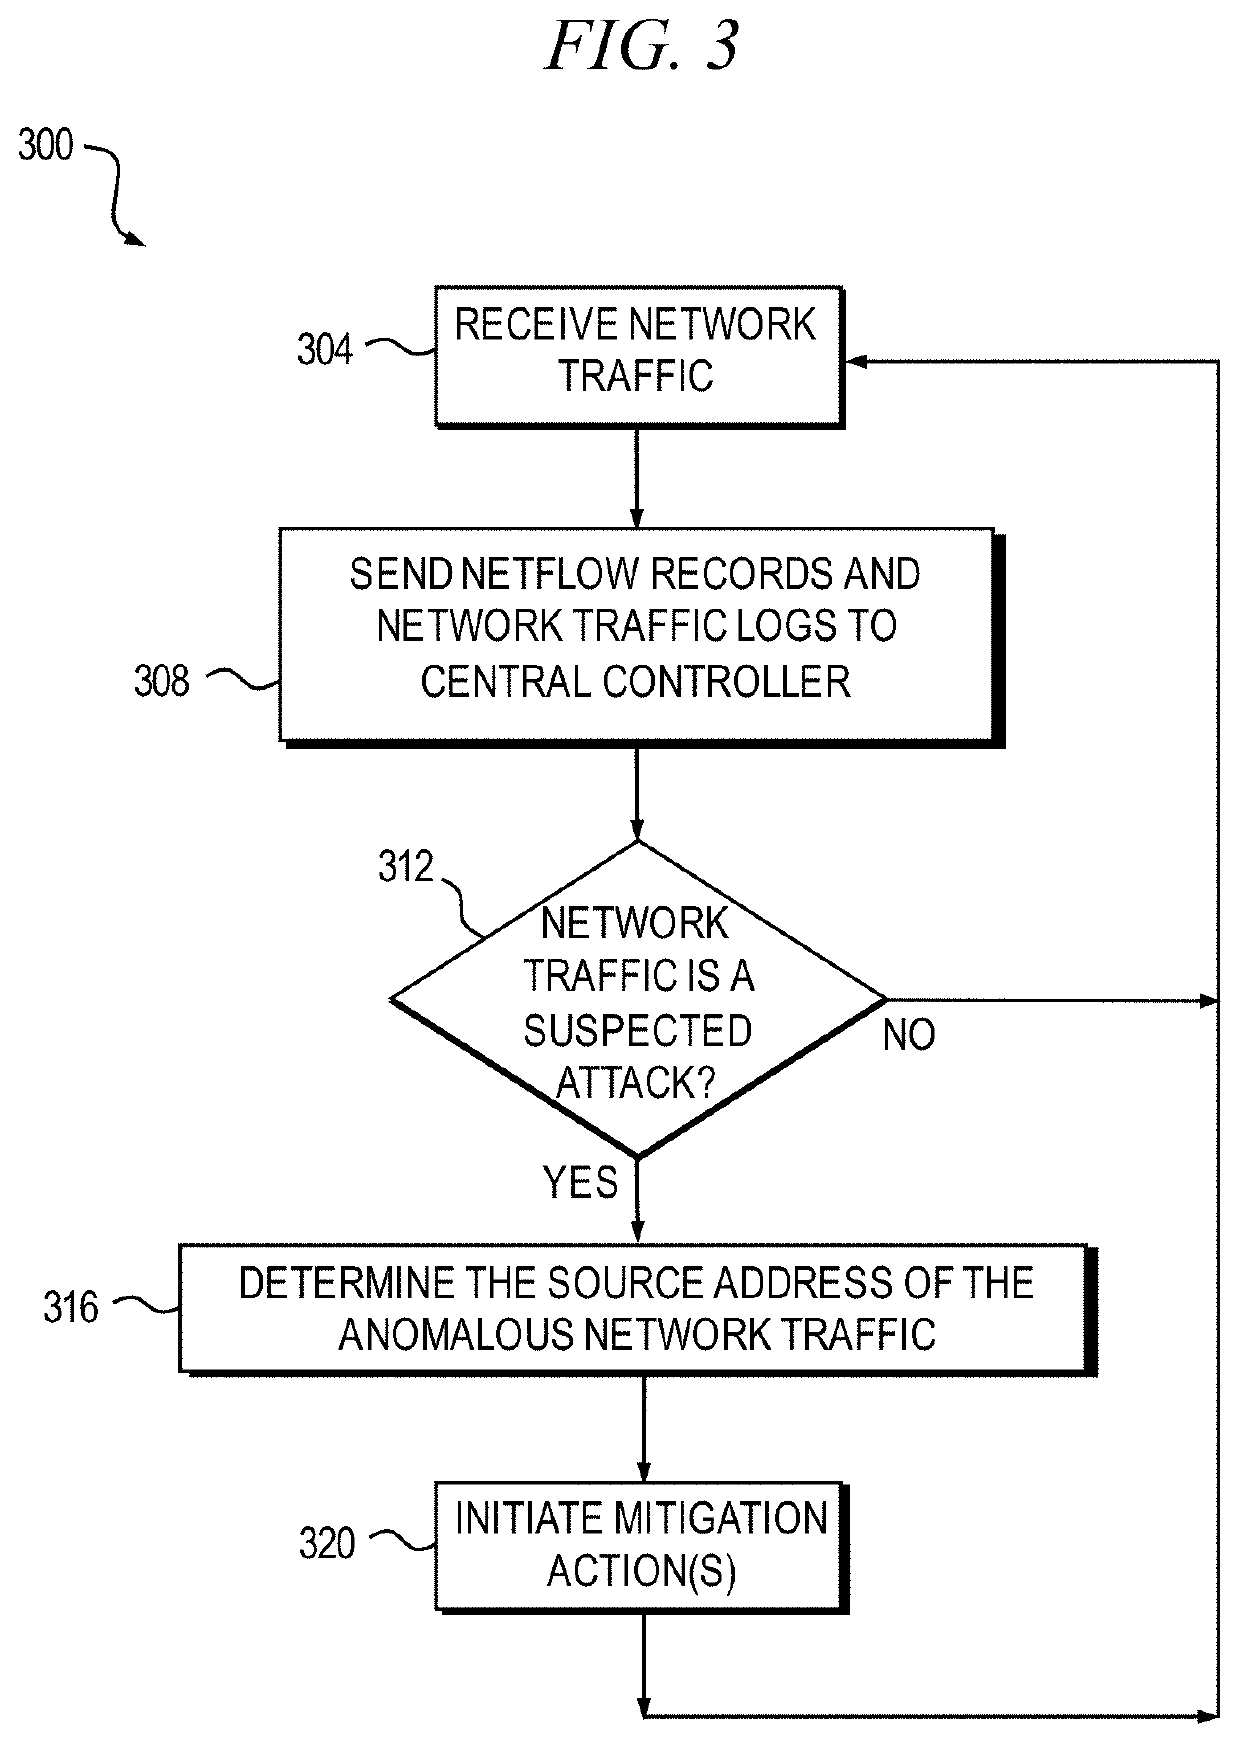 Denial-of-service detection and mitigation solution